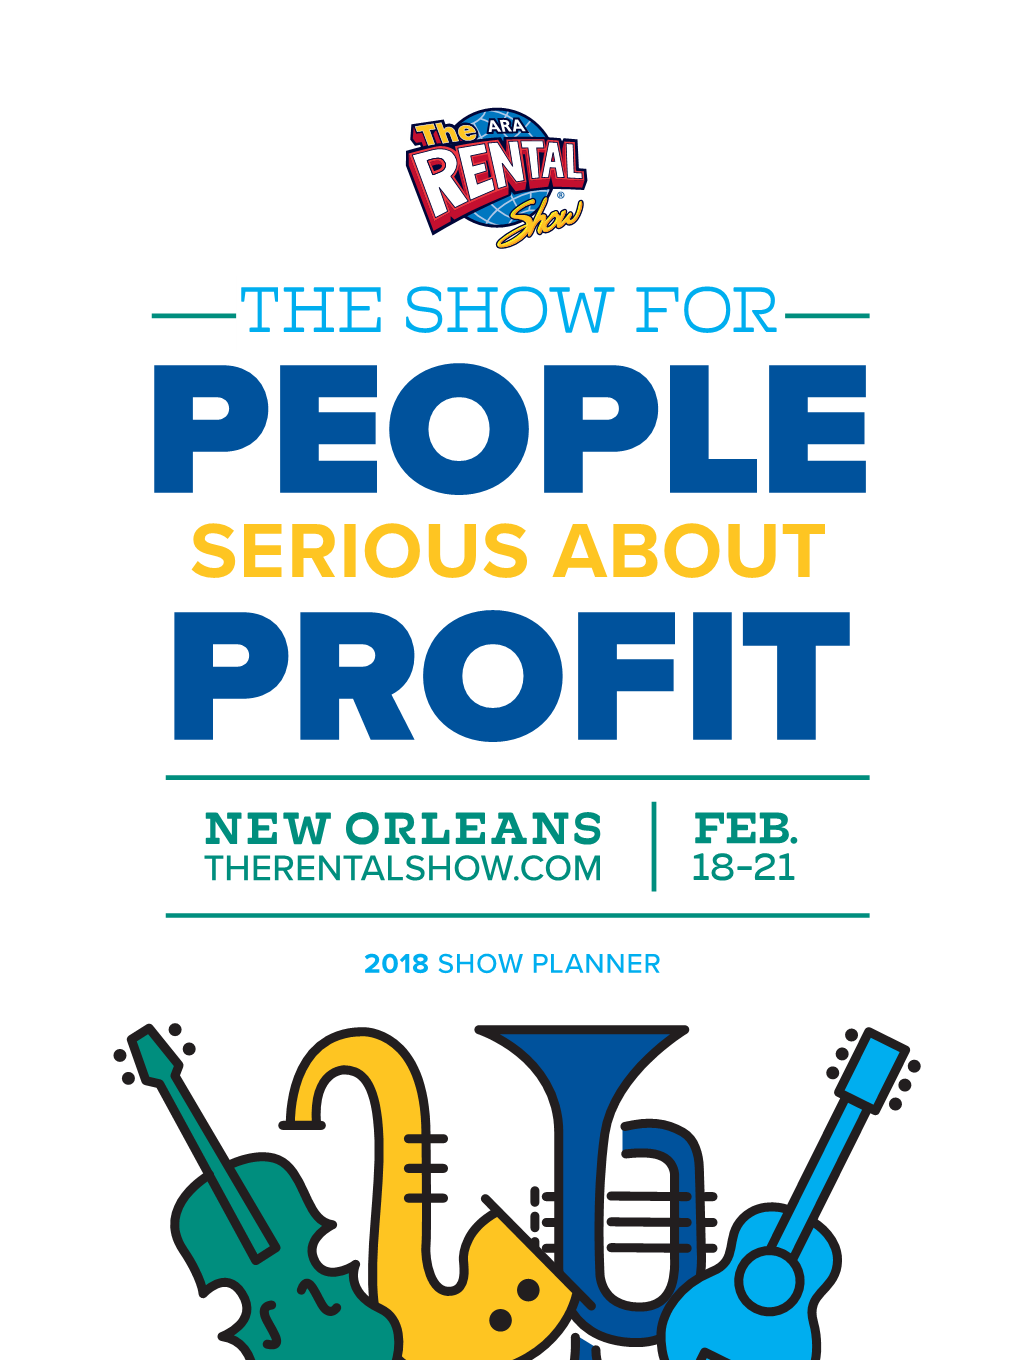 Serious About Profit New Orleans Feb